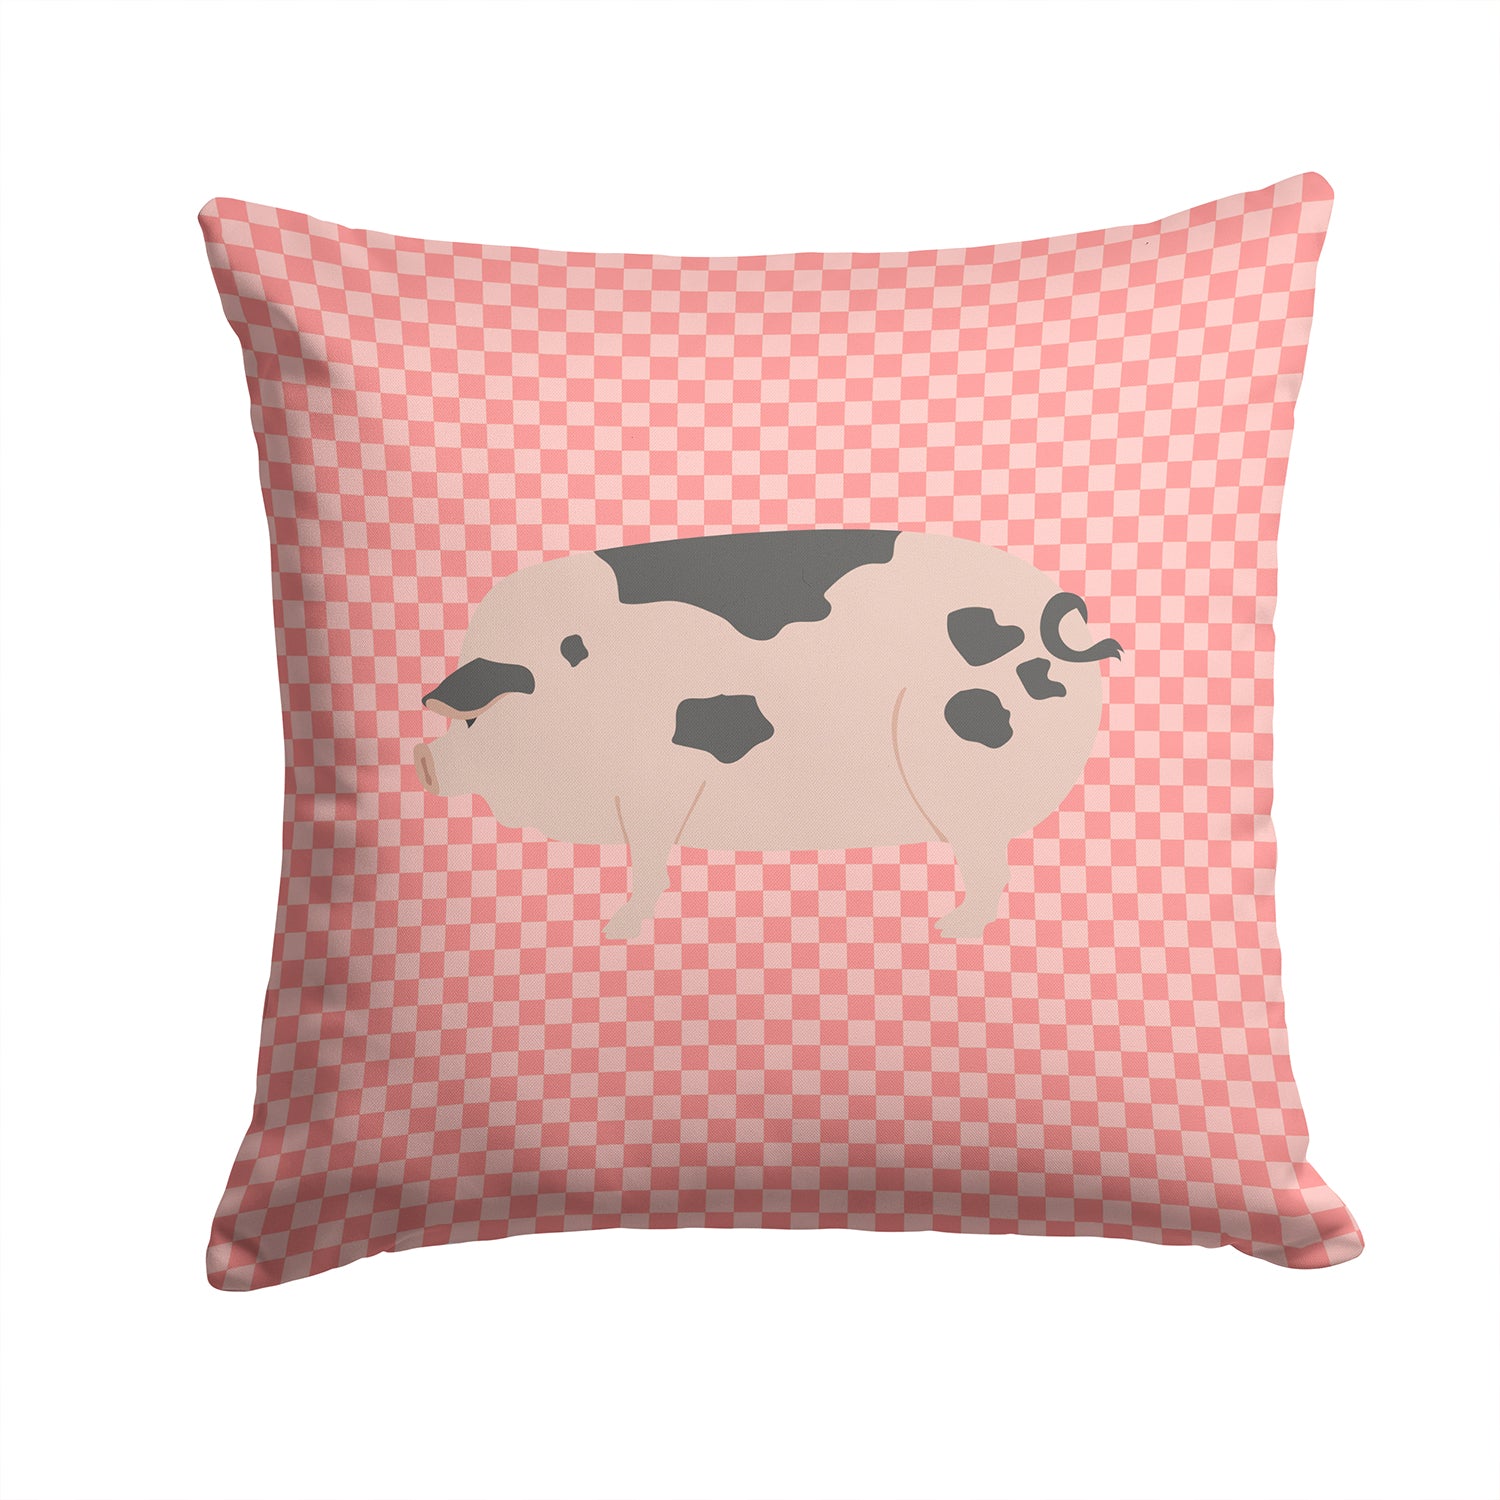 Gloucester Old Spot Pig Pink Check Fabric Decorative Pillow BB7940PW1414 - the-store.com